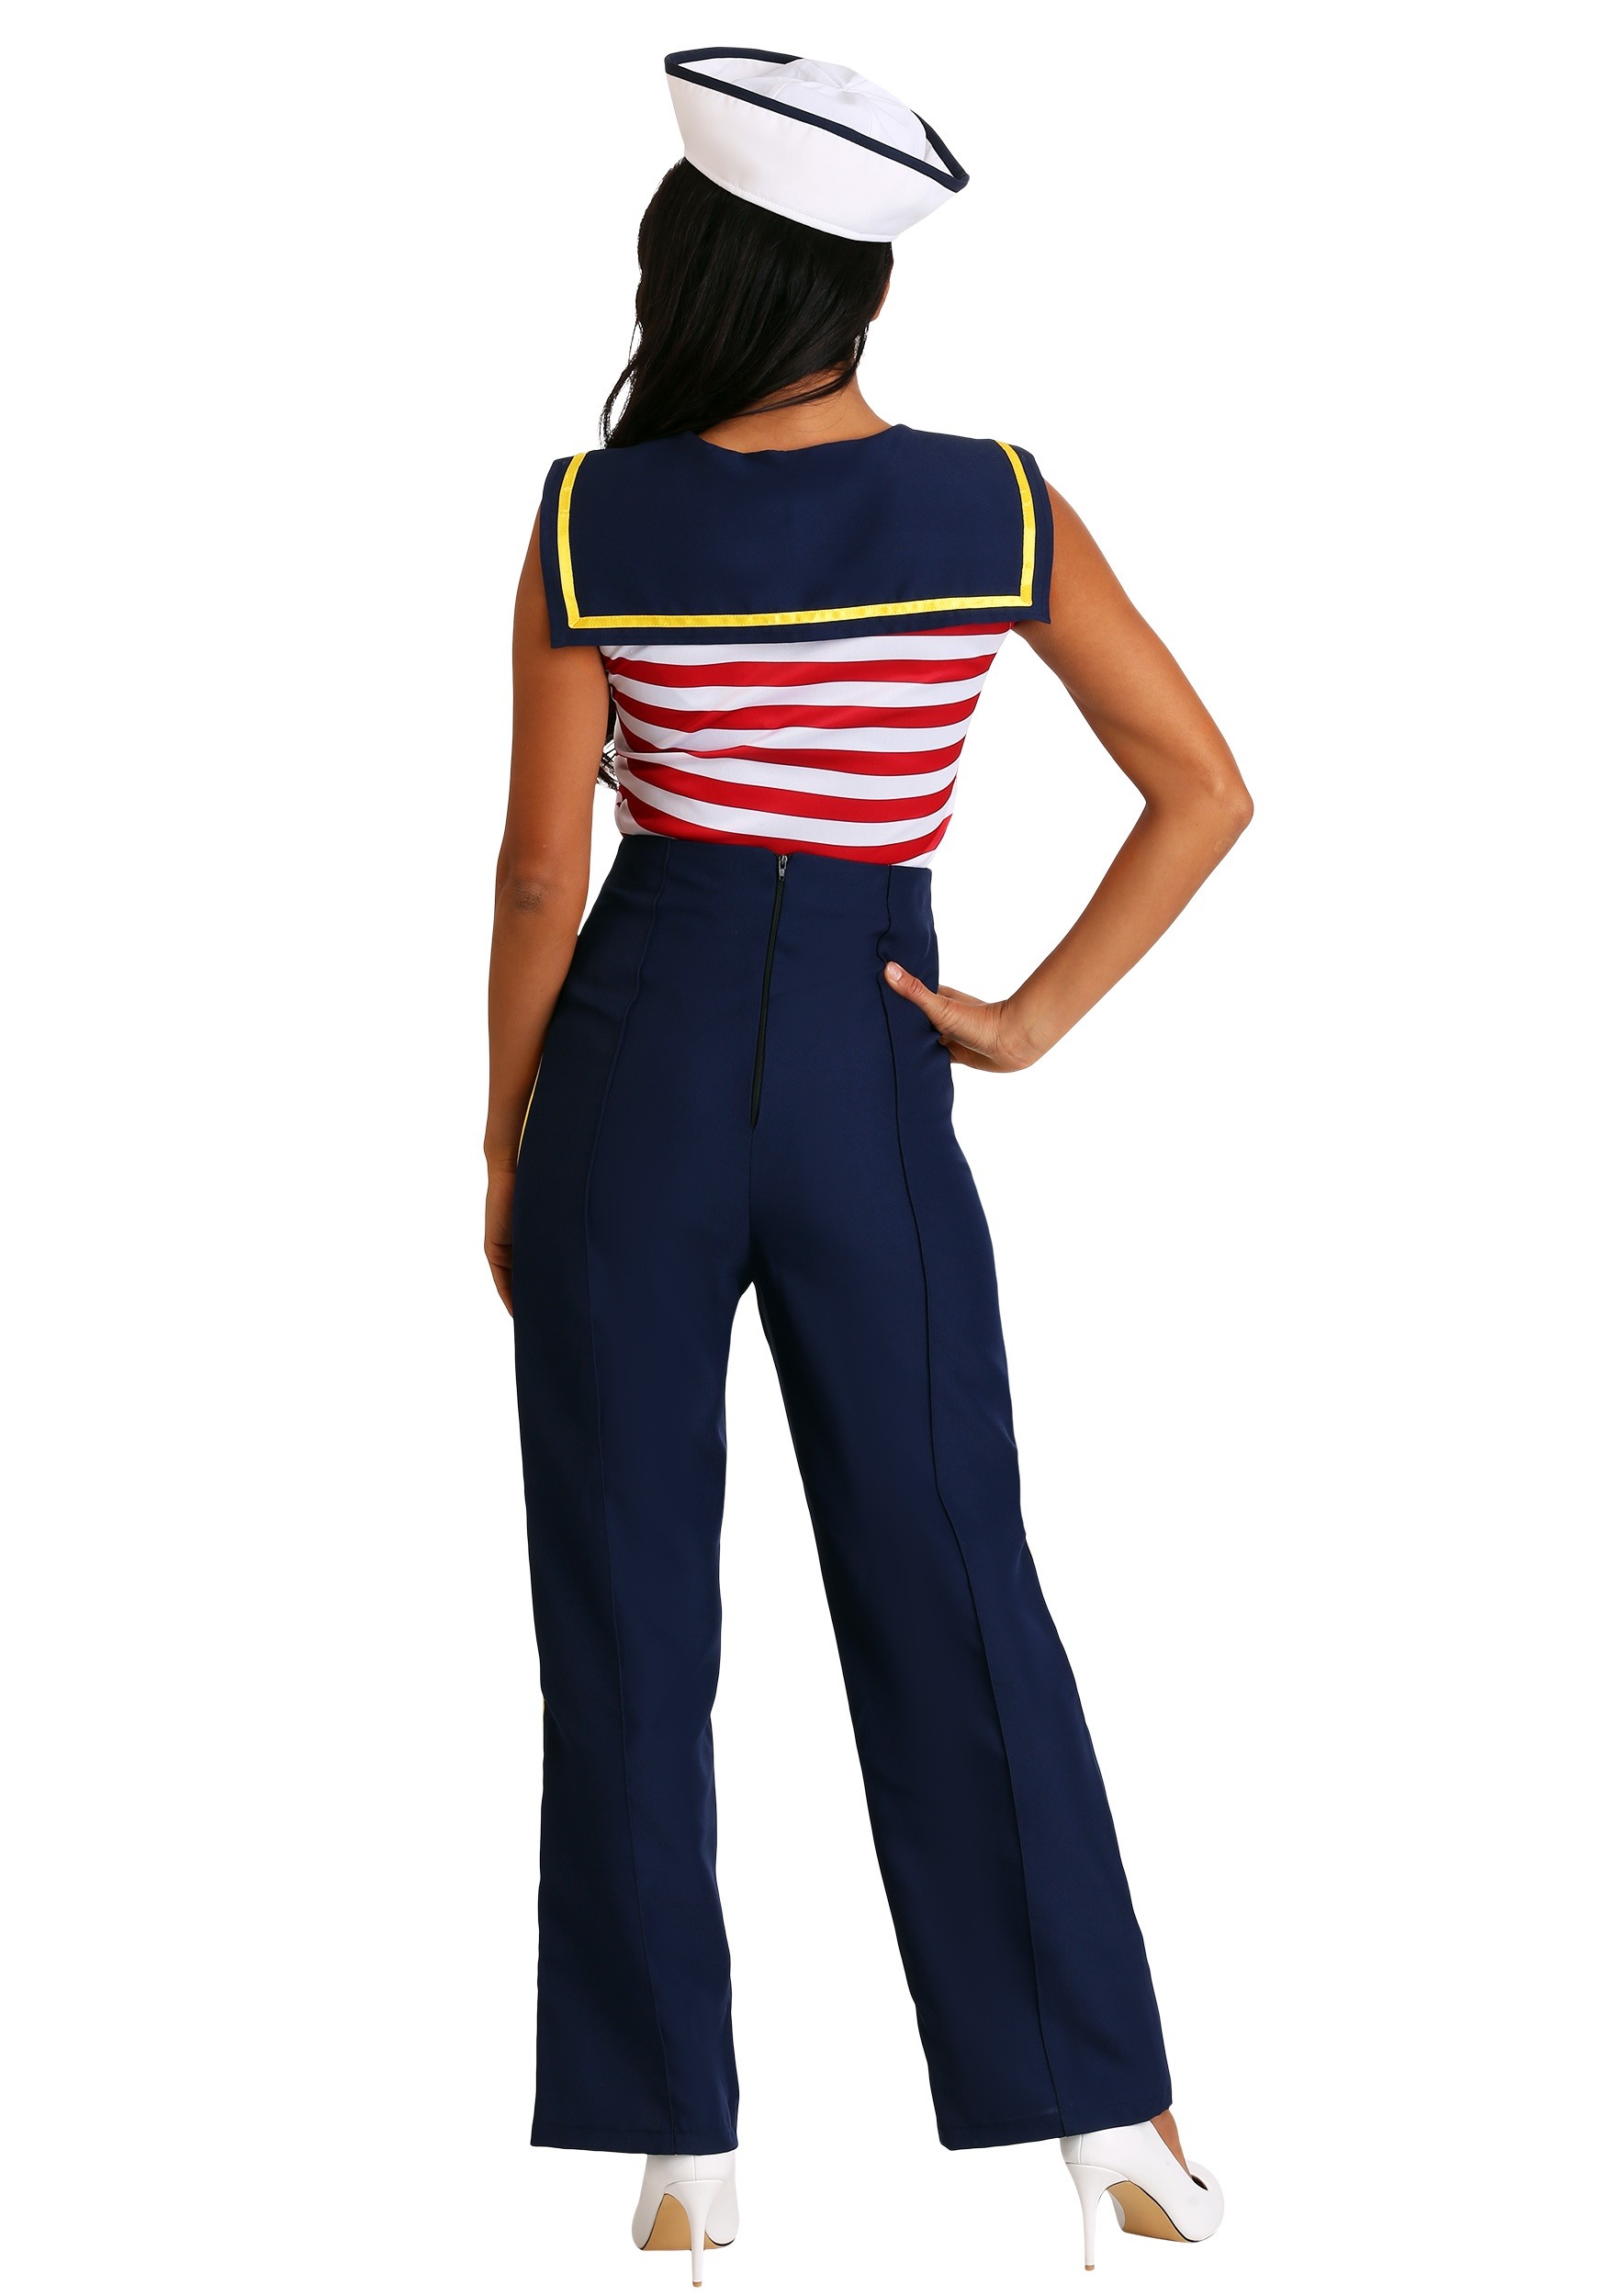 Perfect Pin Up Sailor Costume For Women 5747